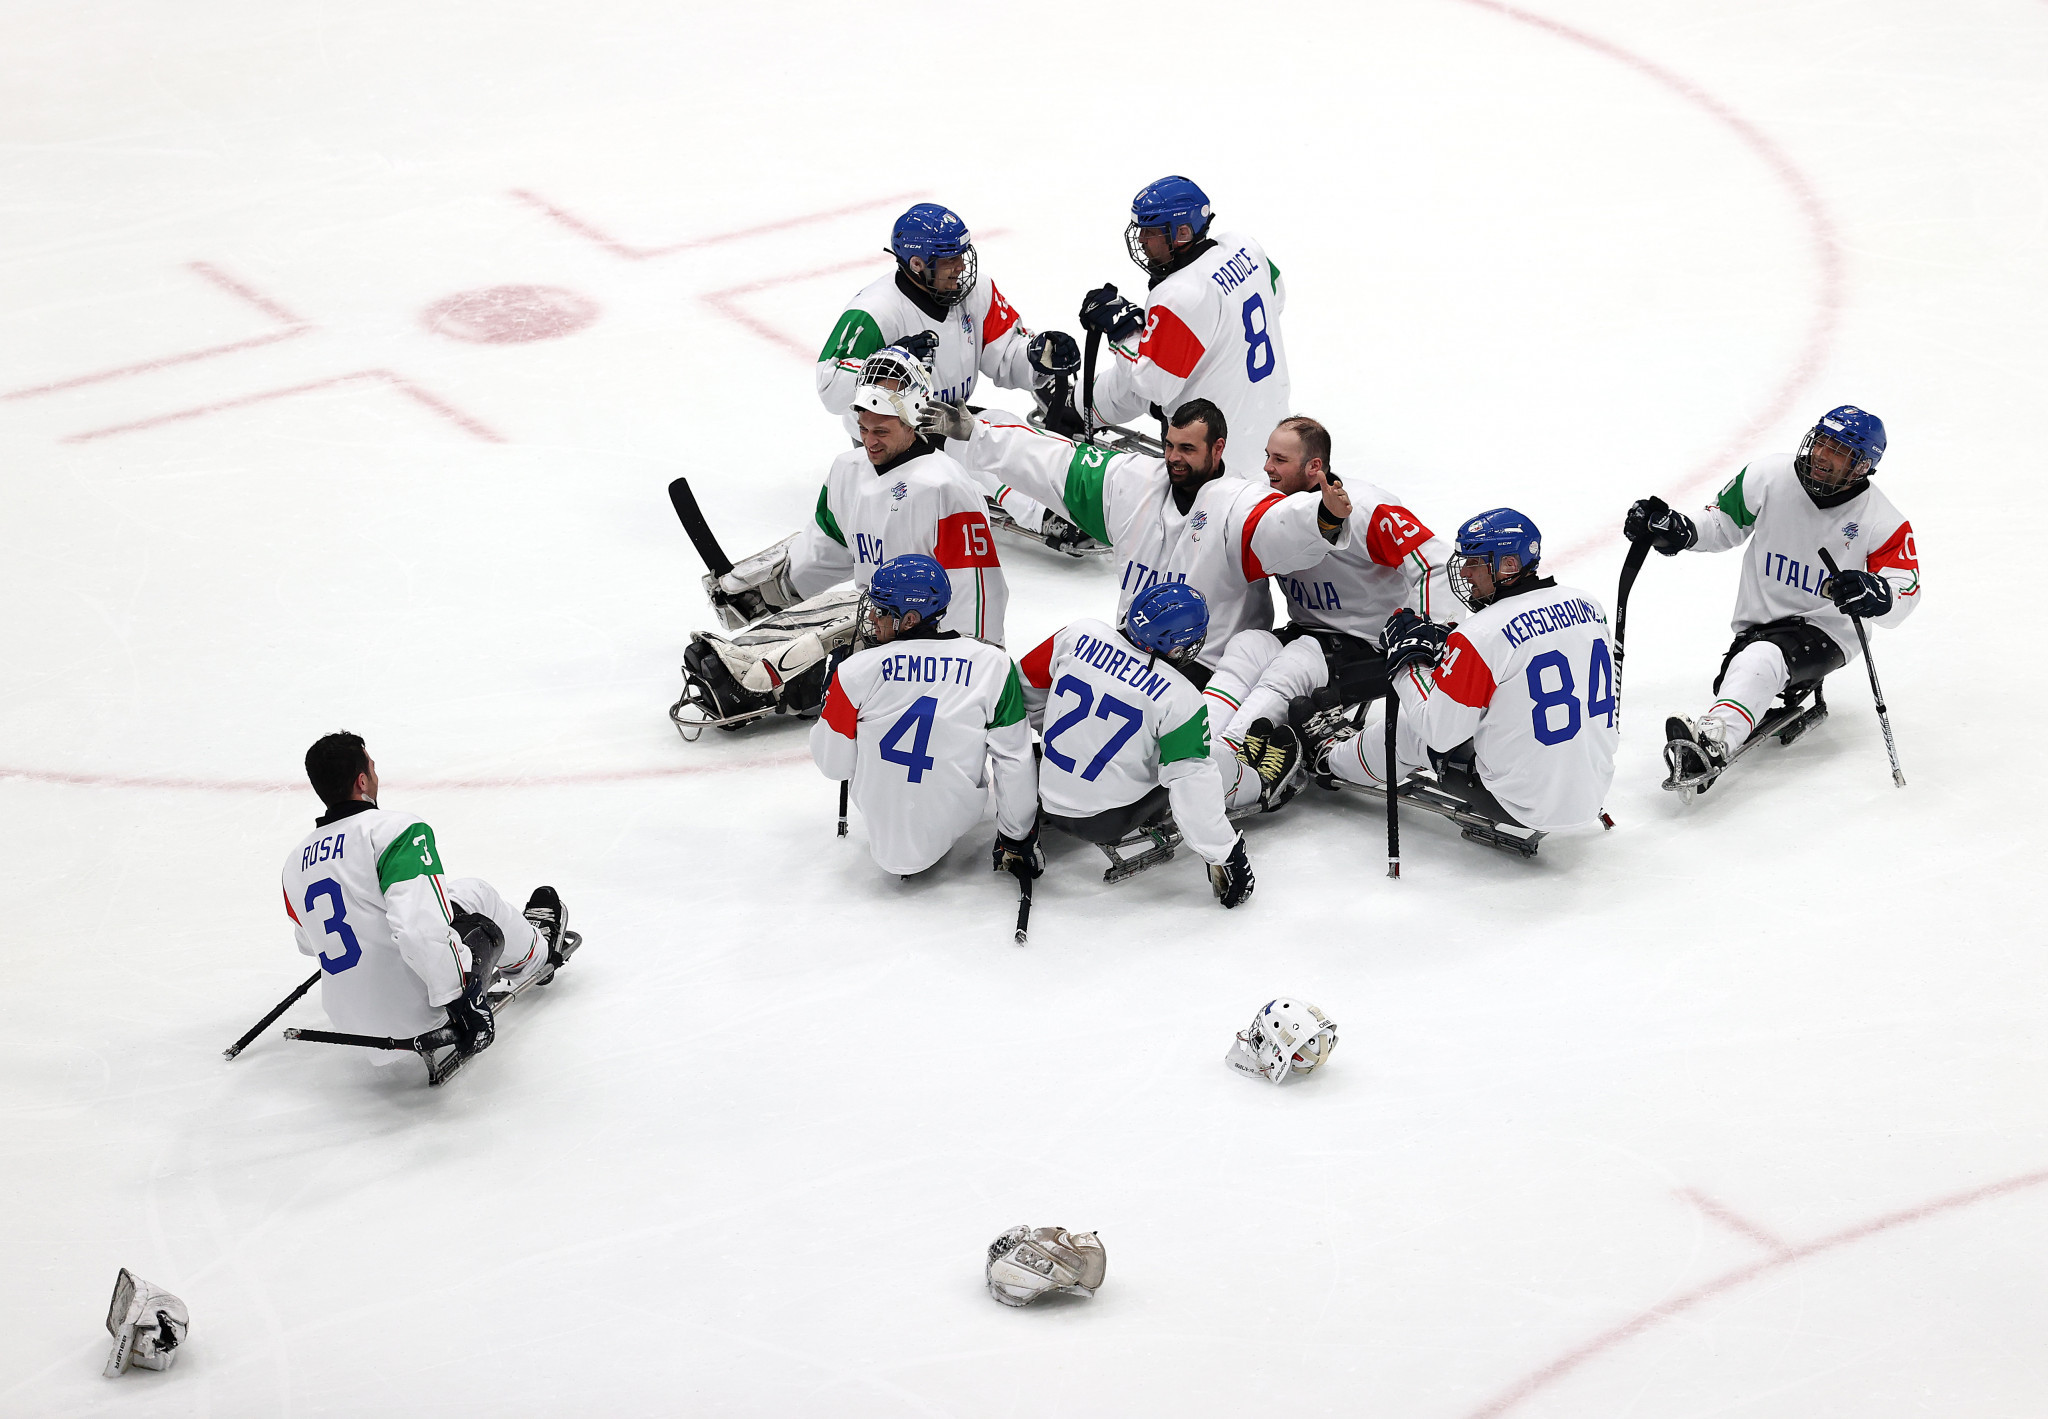 Italy celebrated finishing fifth in the Para ice hockey after a 4-3 victory against Czech Republic ©Getty Images